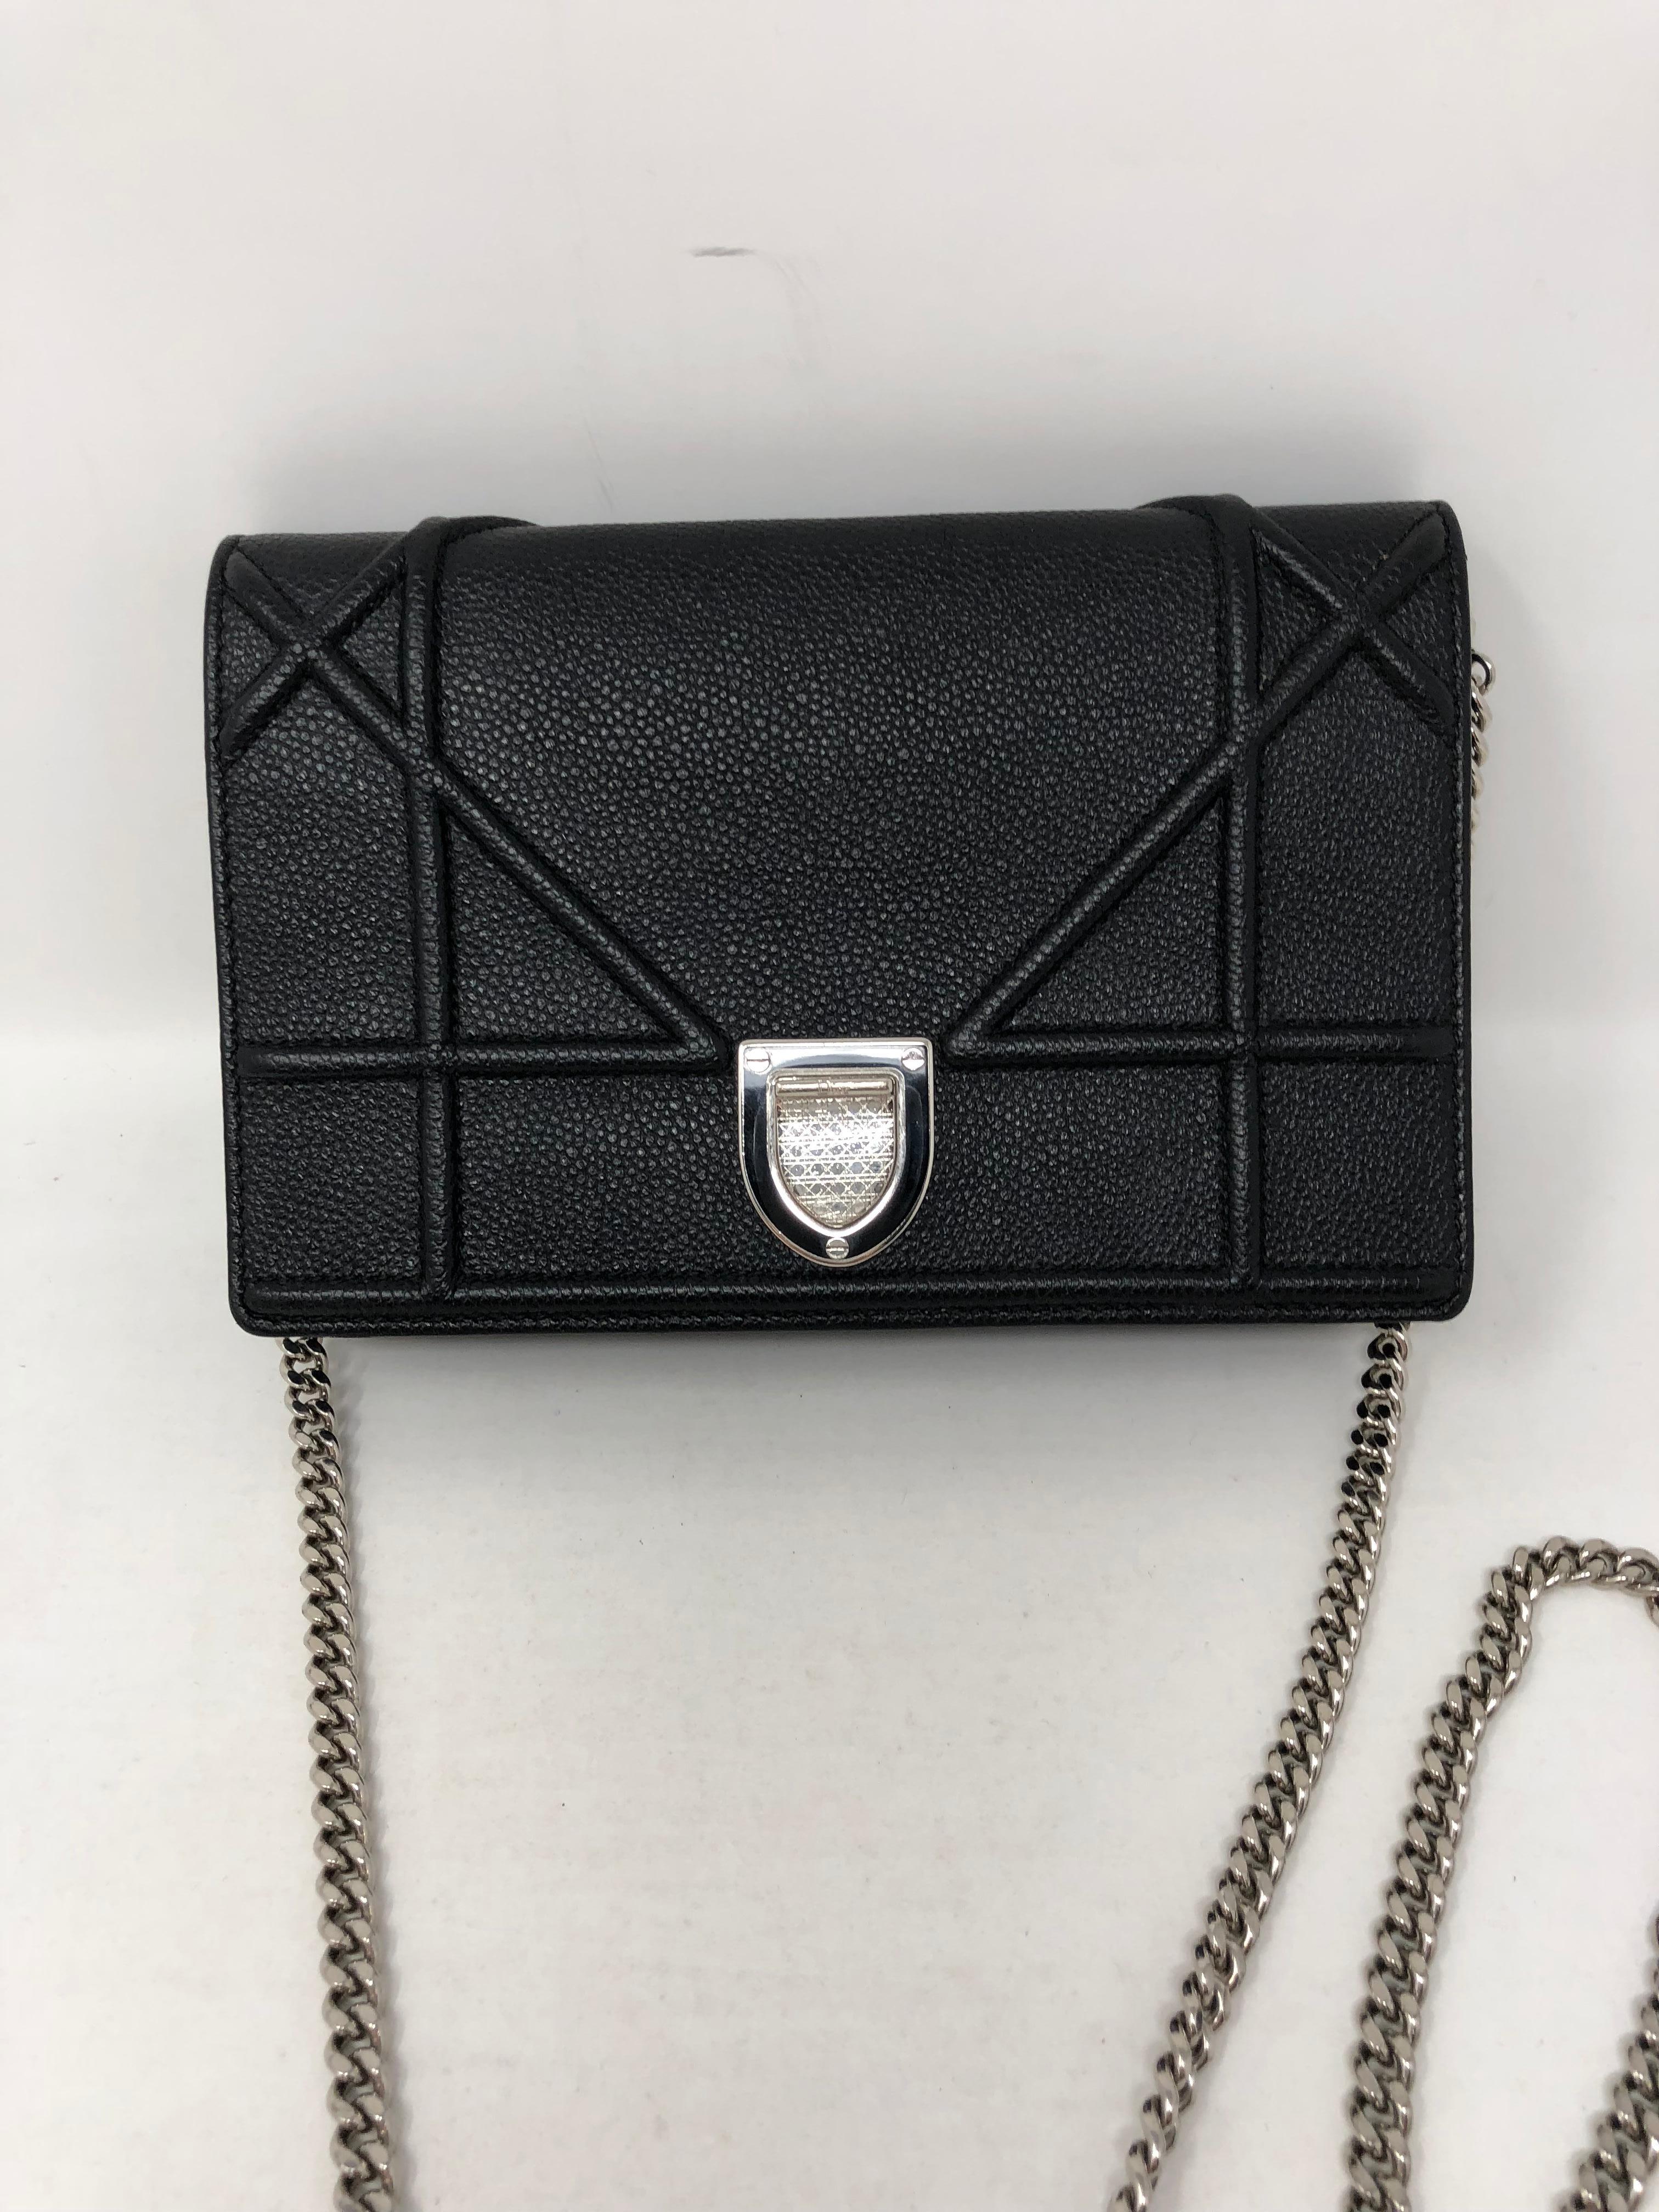 Christian Dior Diorama Black Mini Crossbody. Made of grained calfskin leather and in black. This wallet on a chain is the perfect accessory for day or night. Silver chain link crossbody or can be worn as a clutch.